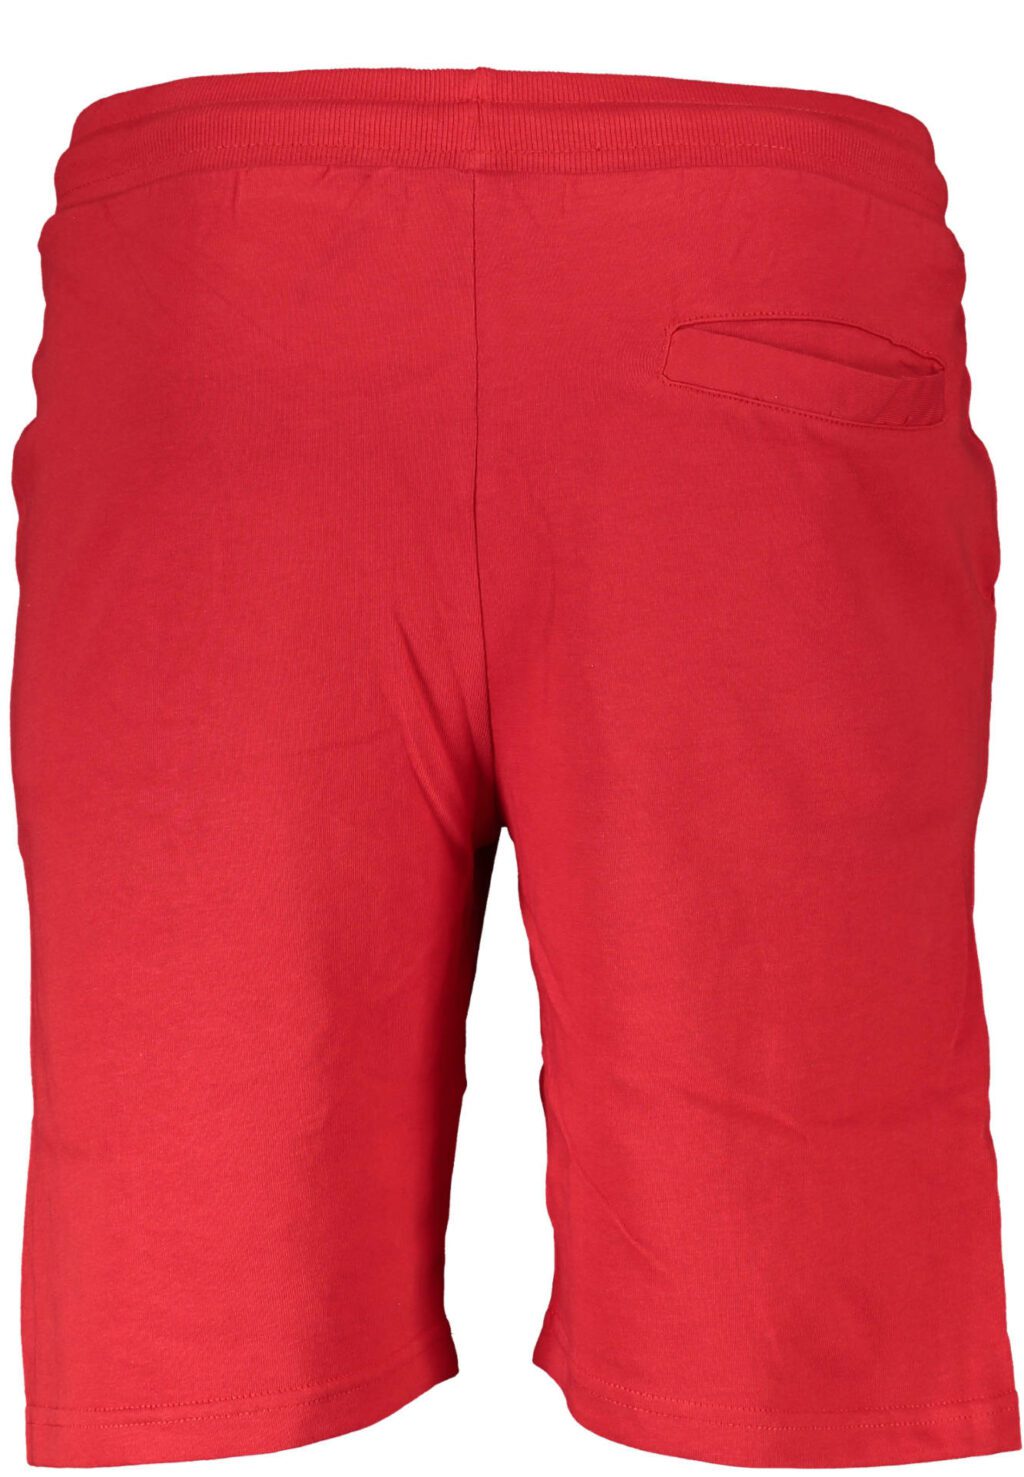 US GRAND POLO PANTS SHORT MAN RED USB-356_ROSSO_ROSSO